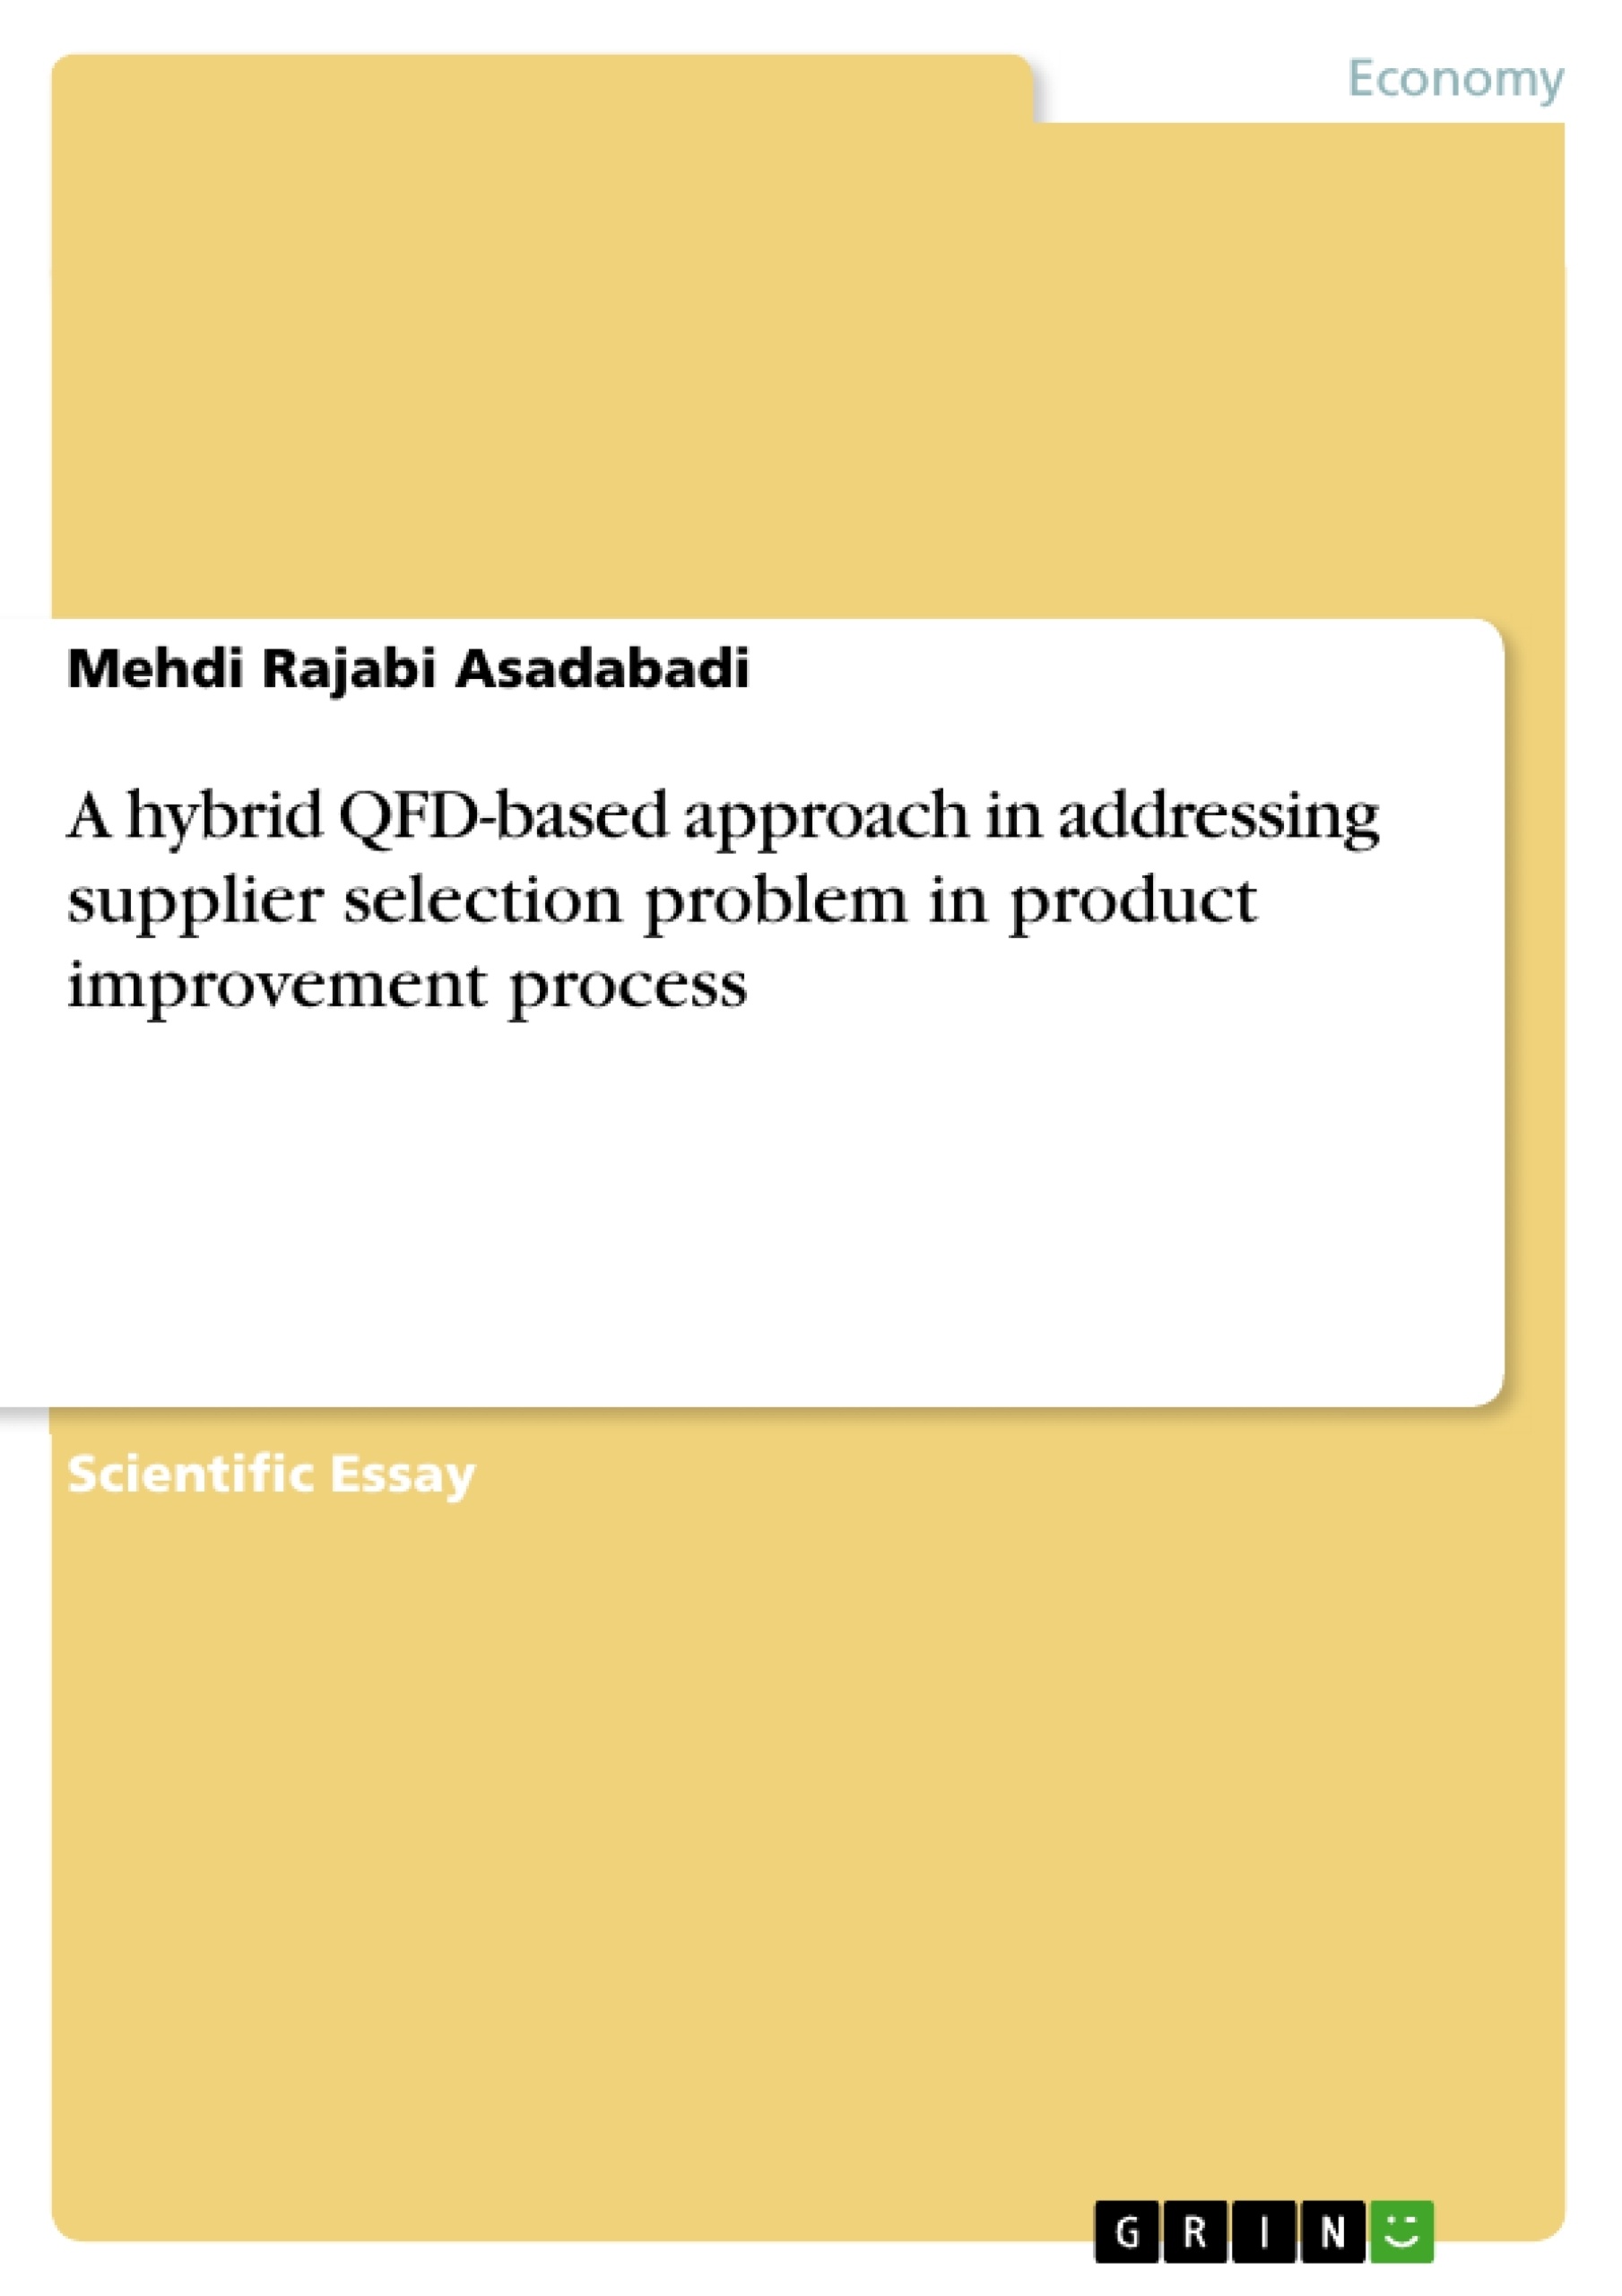 Titel: A hybrid QFD-based approach in addressing supplier selection problem in product improvement process